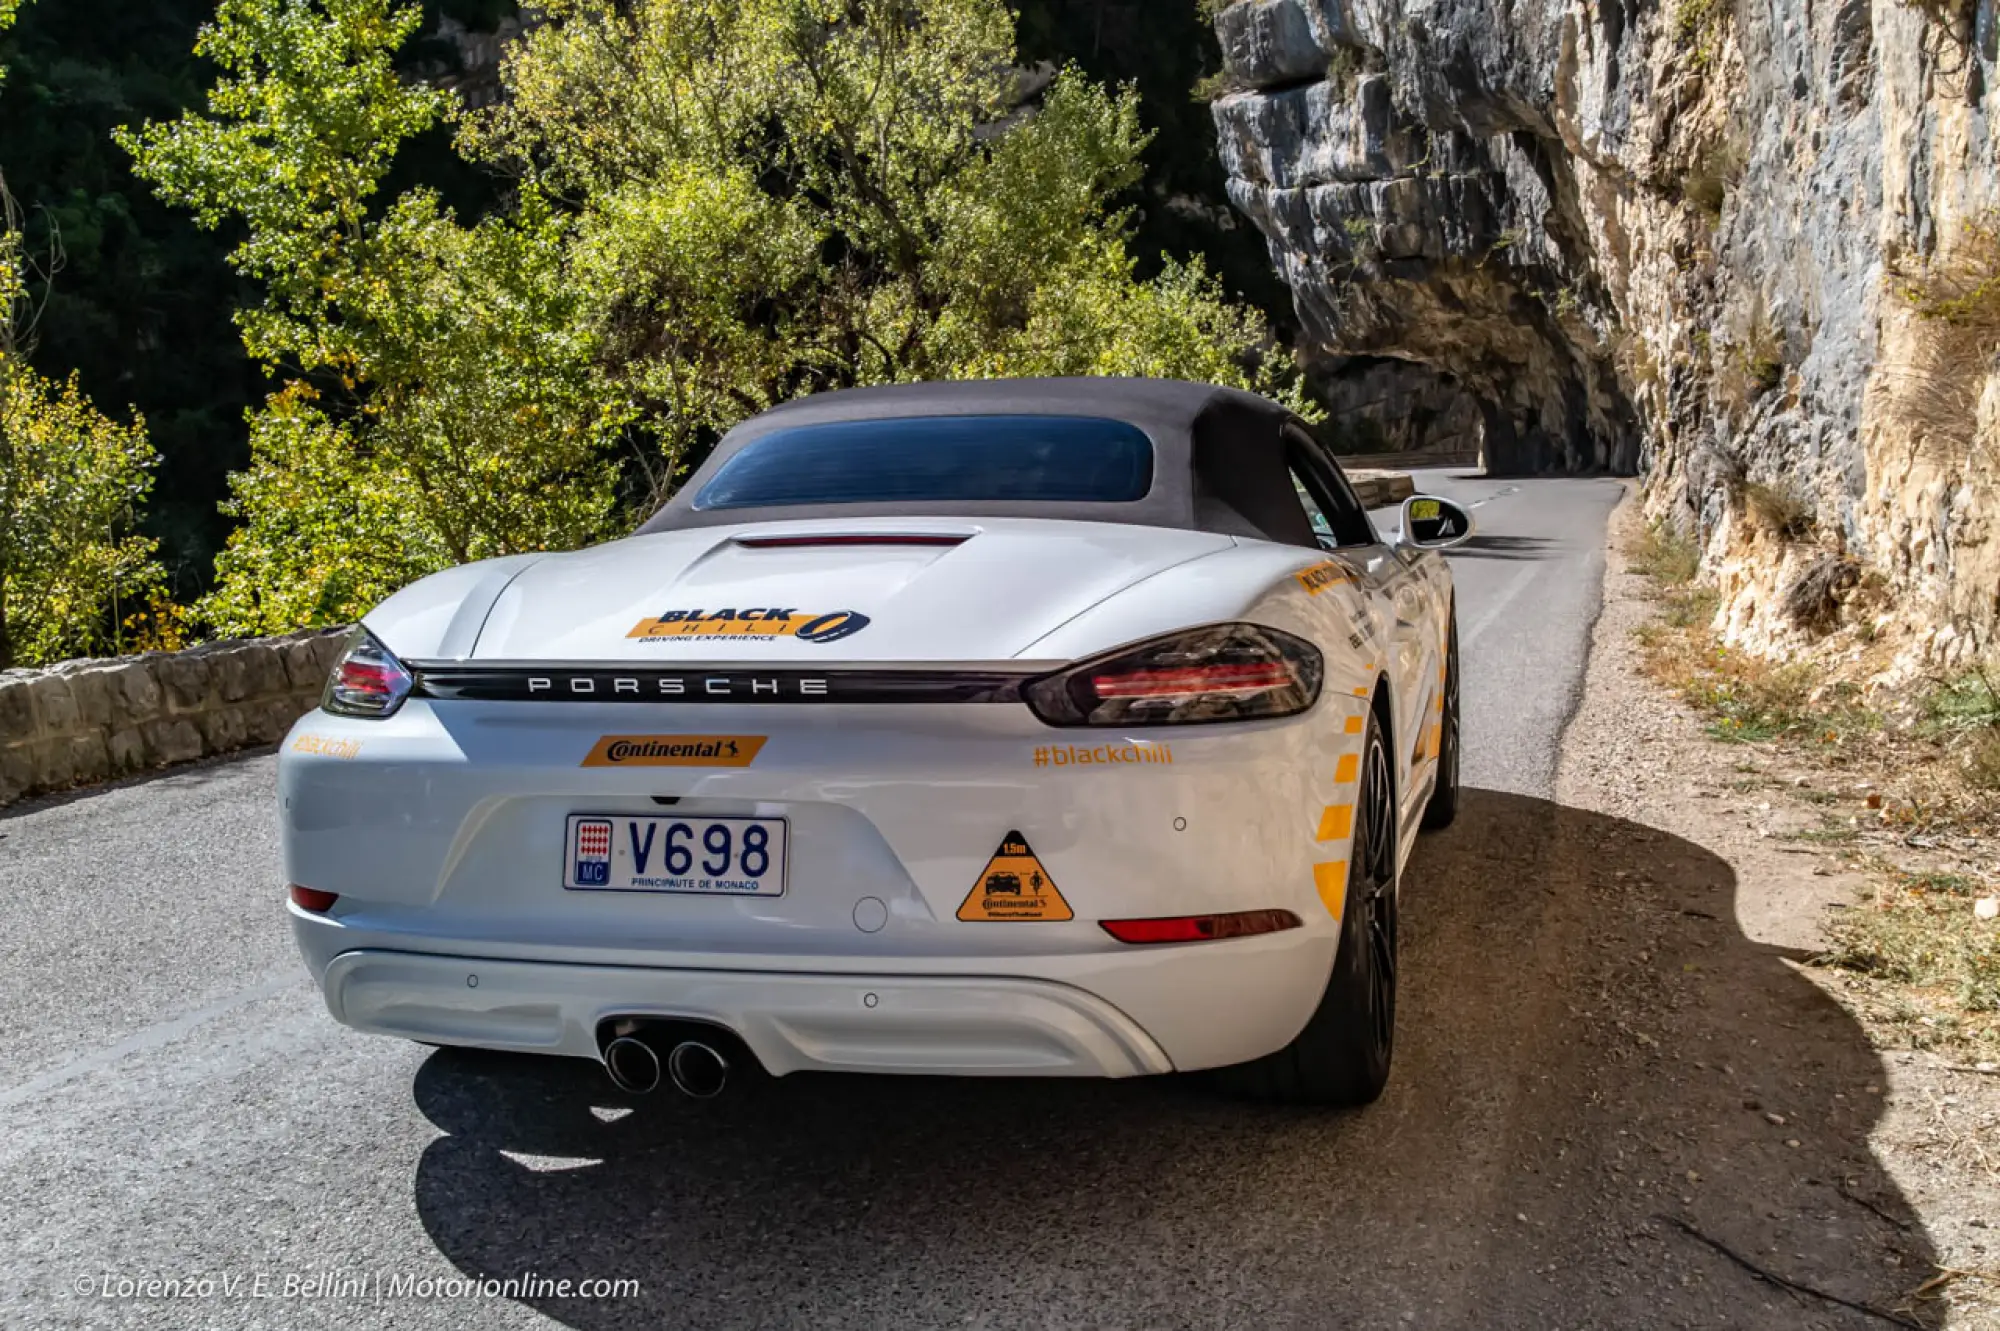 Continental Black Chili Driving Experience 2019 - 16